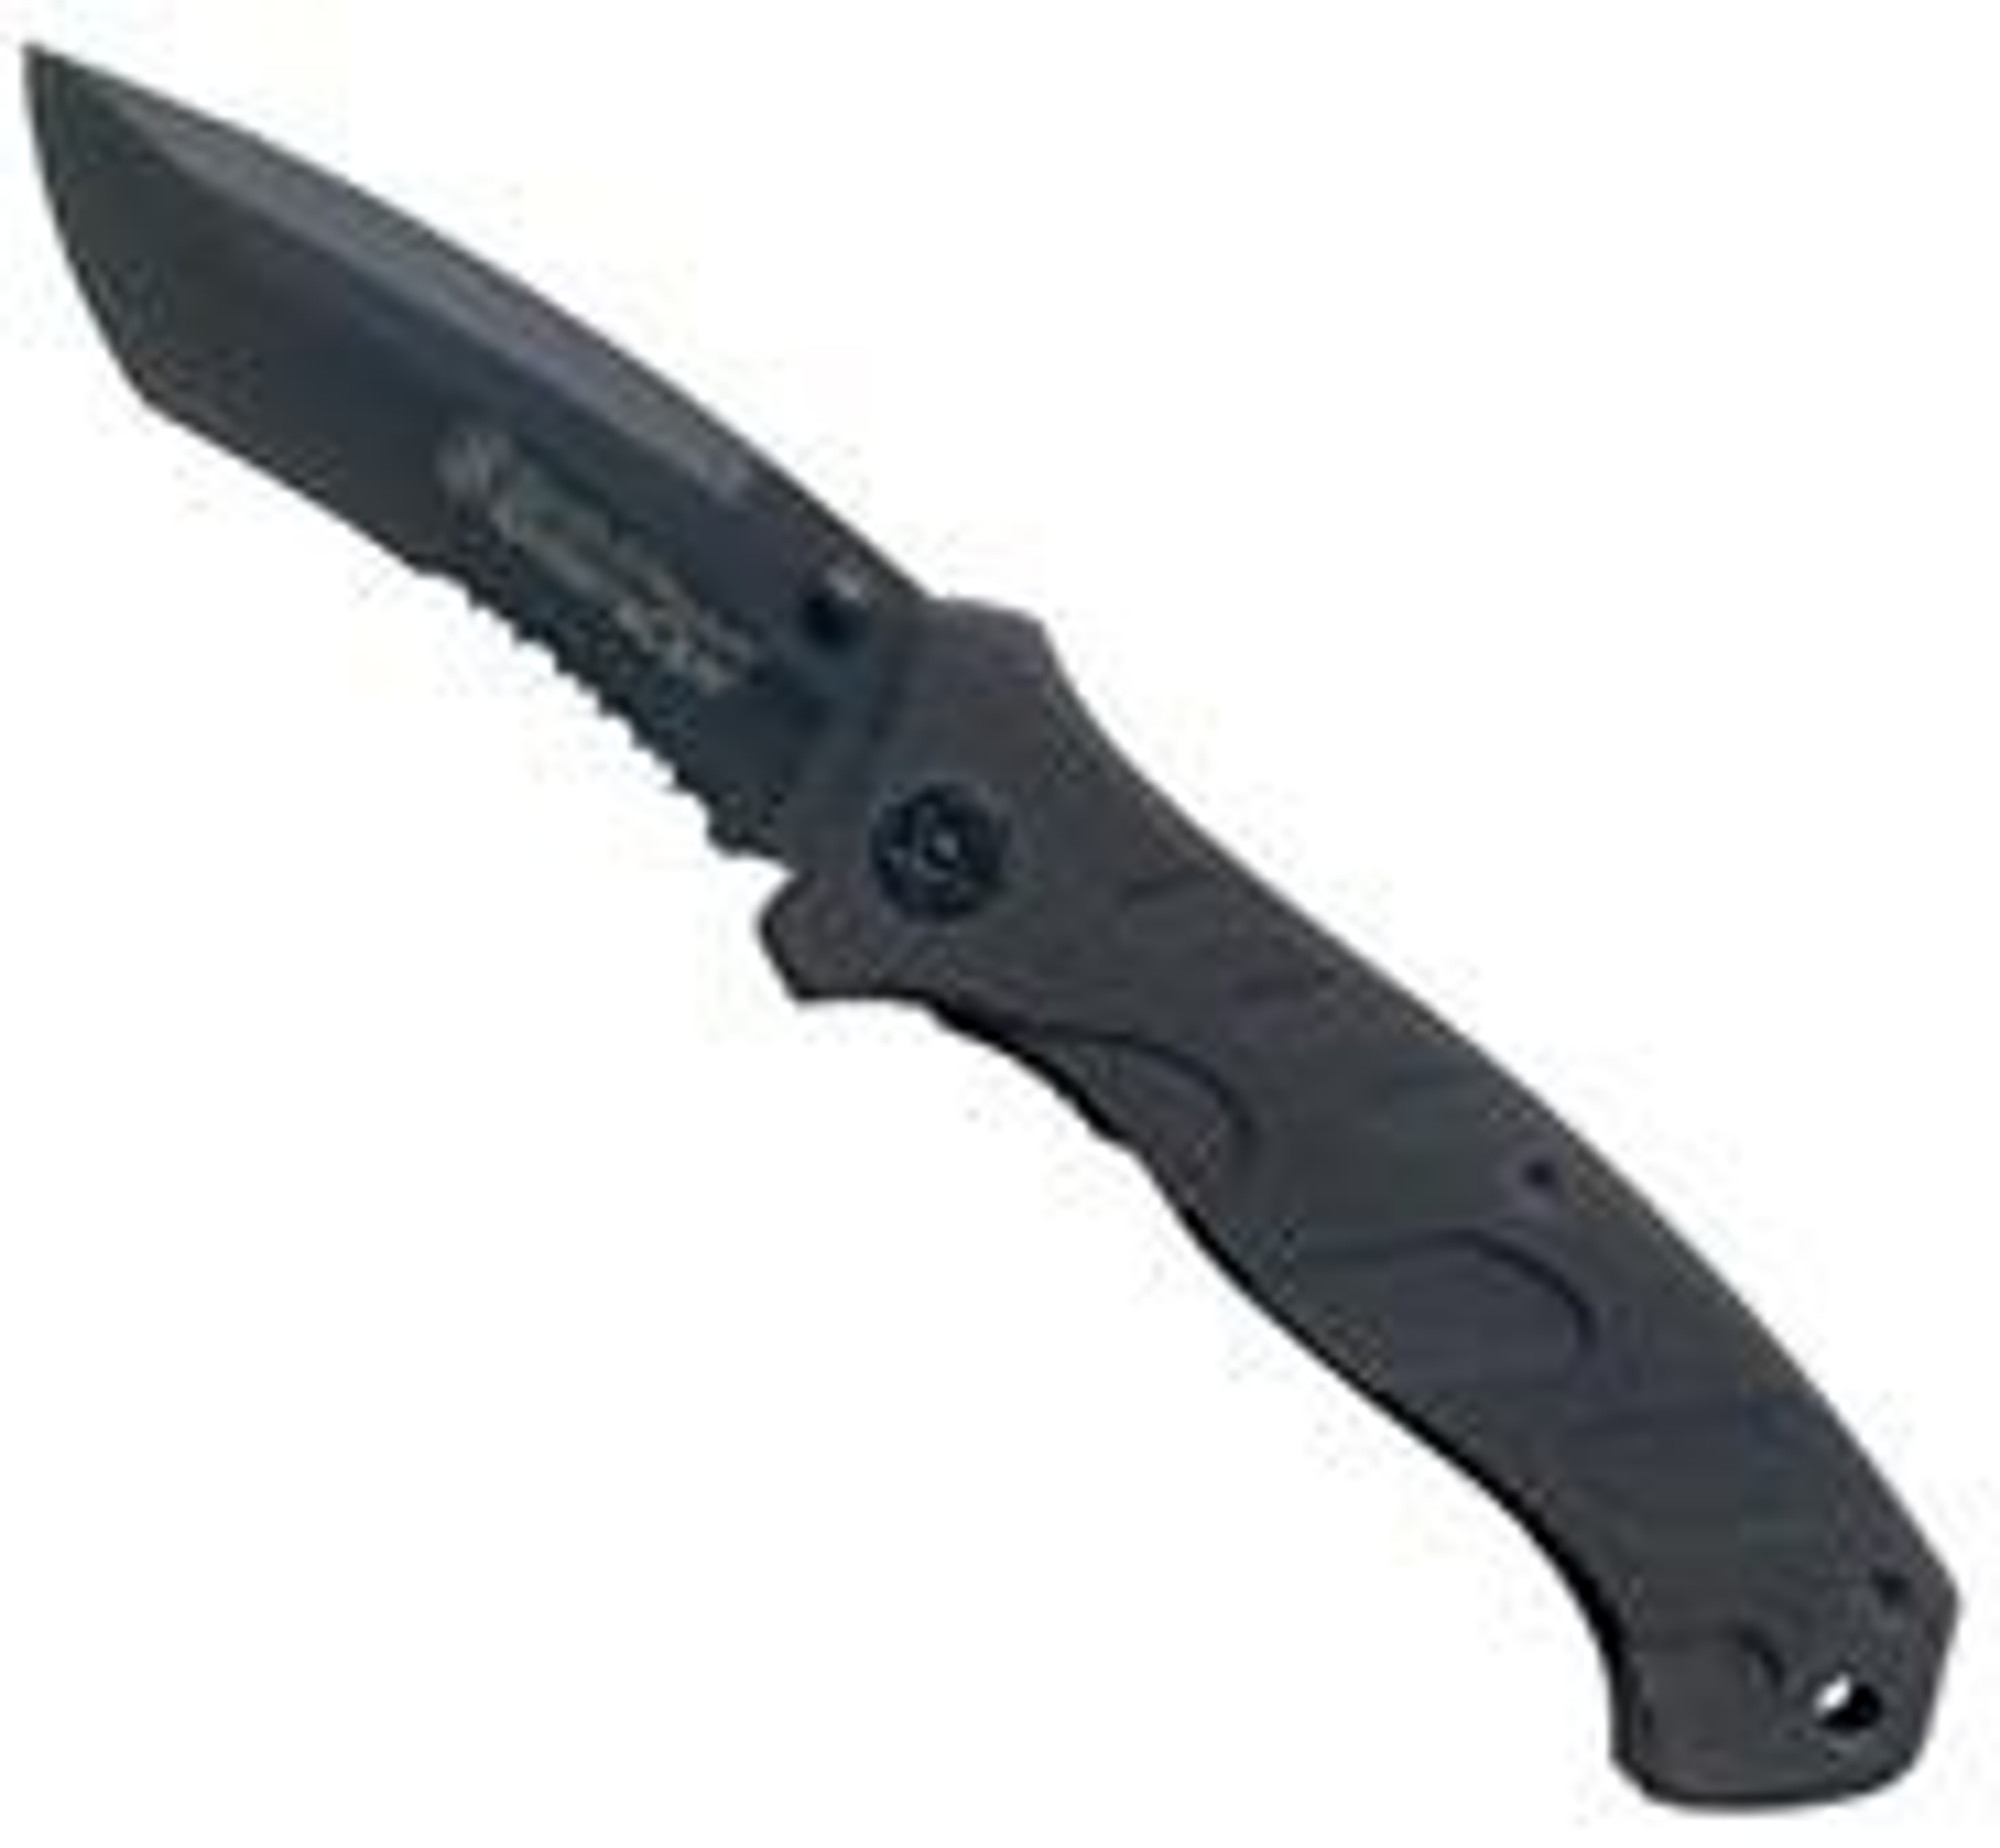 Smith & Wesson Extreme Ops Serrated Folder Knife